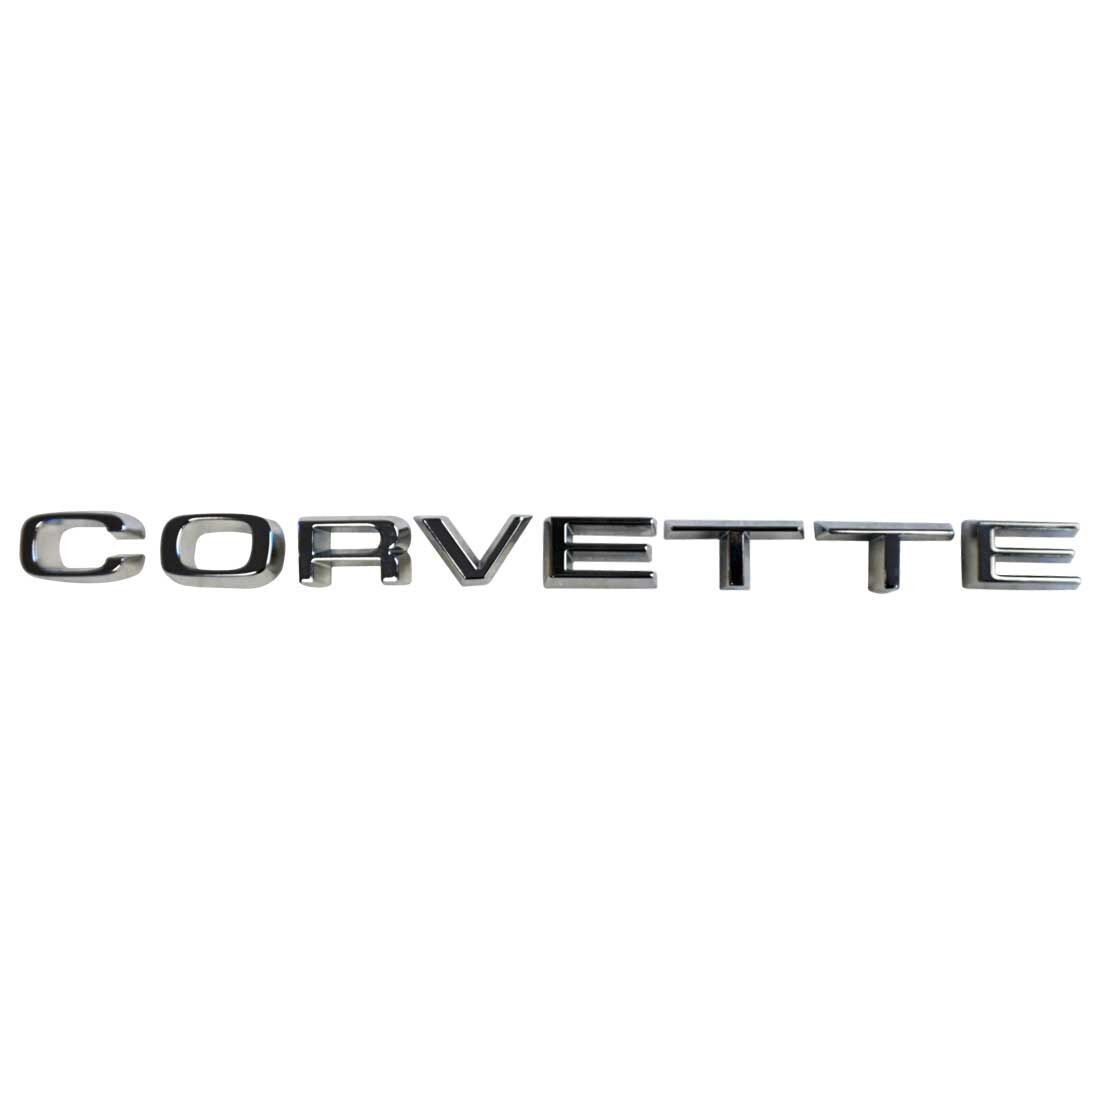 1974-1975 Corvette Rear Letter Set with Nuts